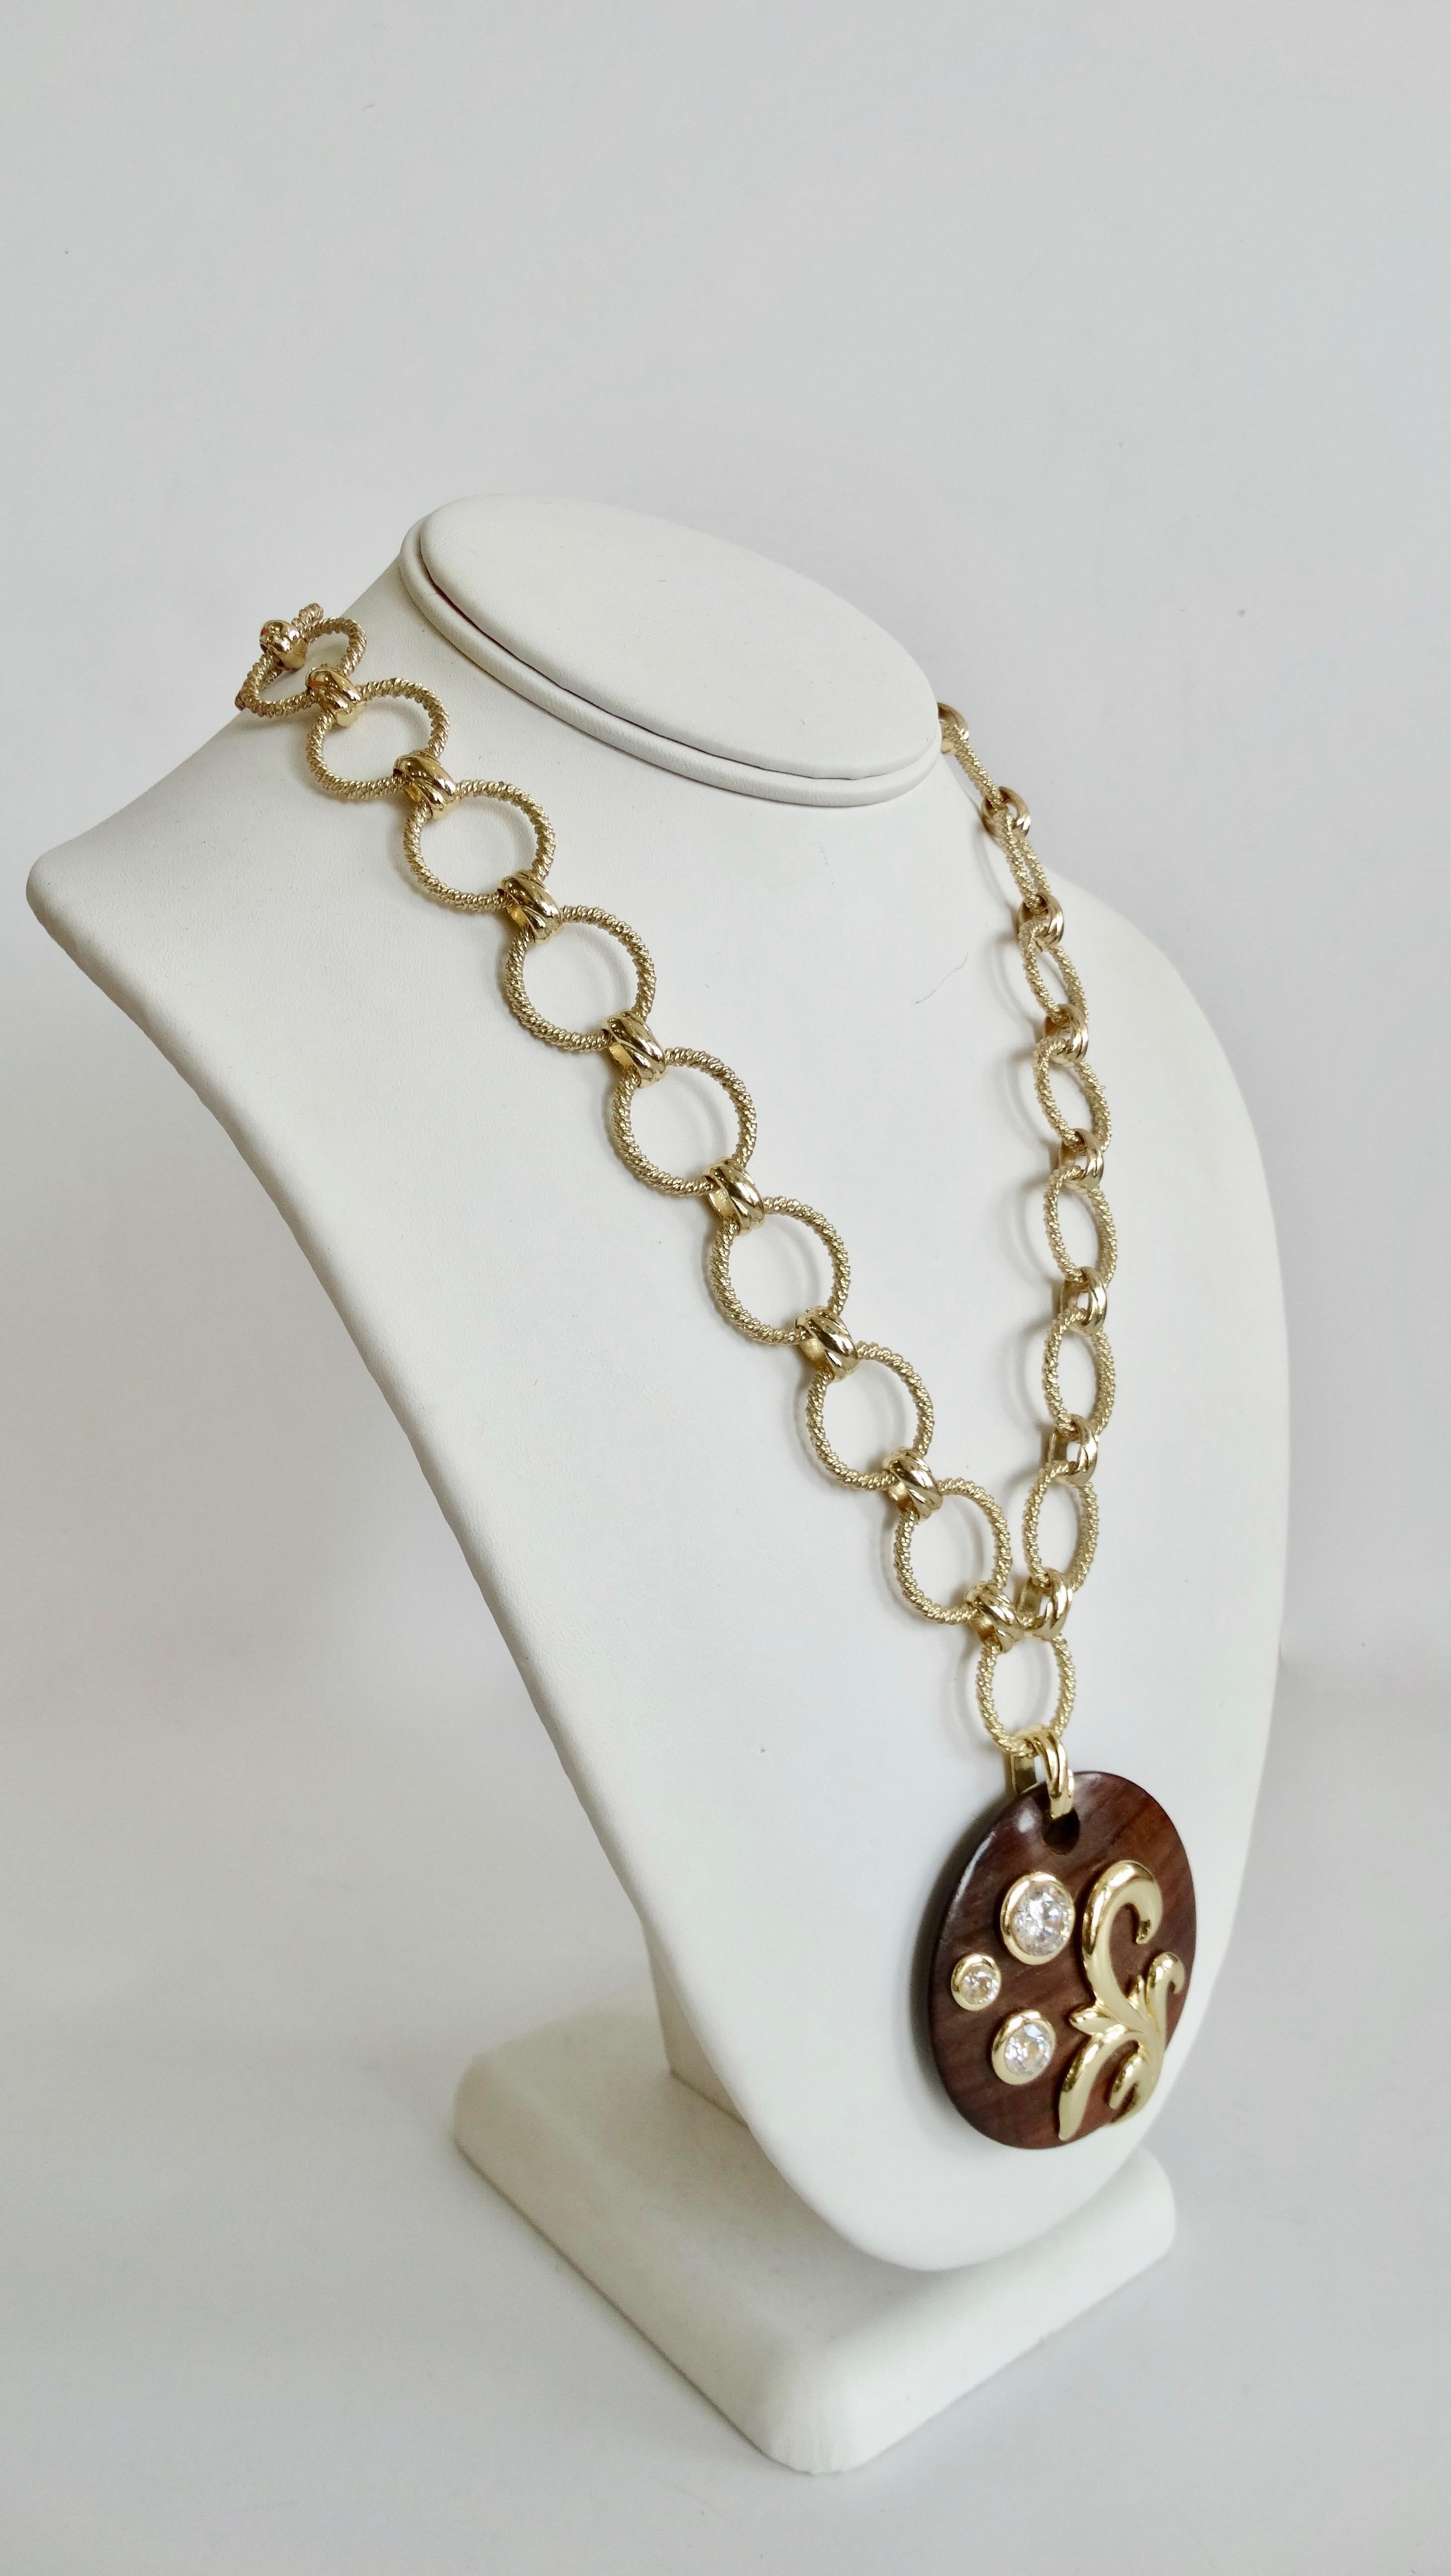 We all need a great vintage jewelry piece in our collection! Circa late 1980s, this Dominique Aurientis necklace features a textured gold plated link chain and a round dark wood stained pendant embellished with three Swarovski crystals and a gold